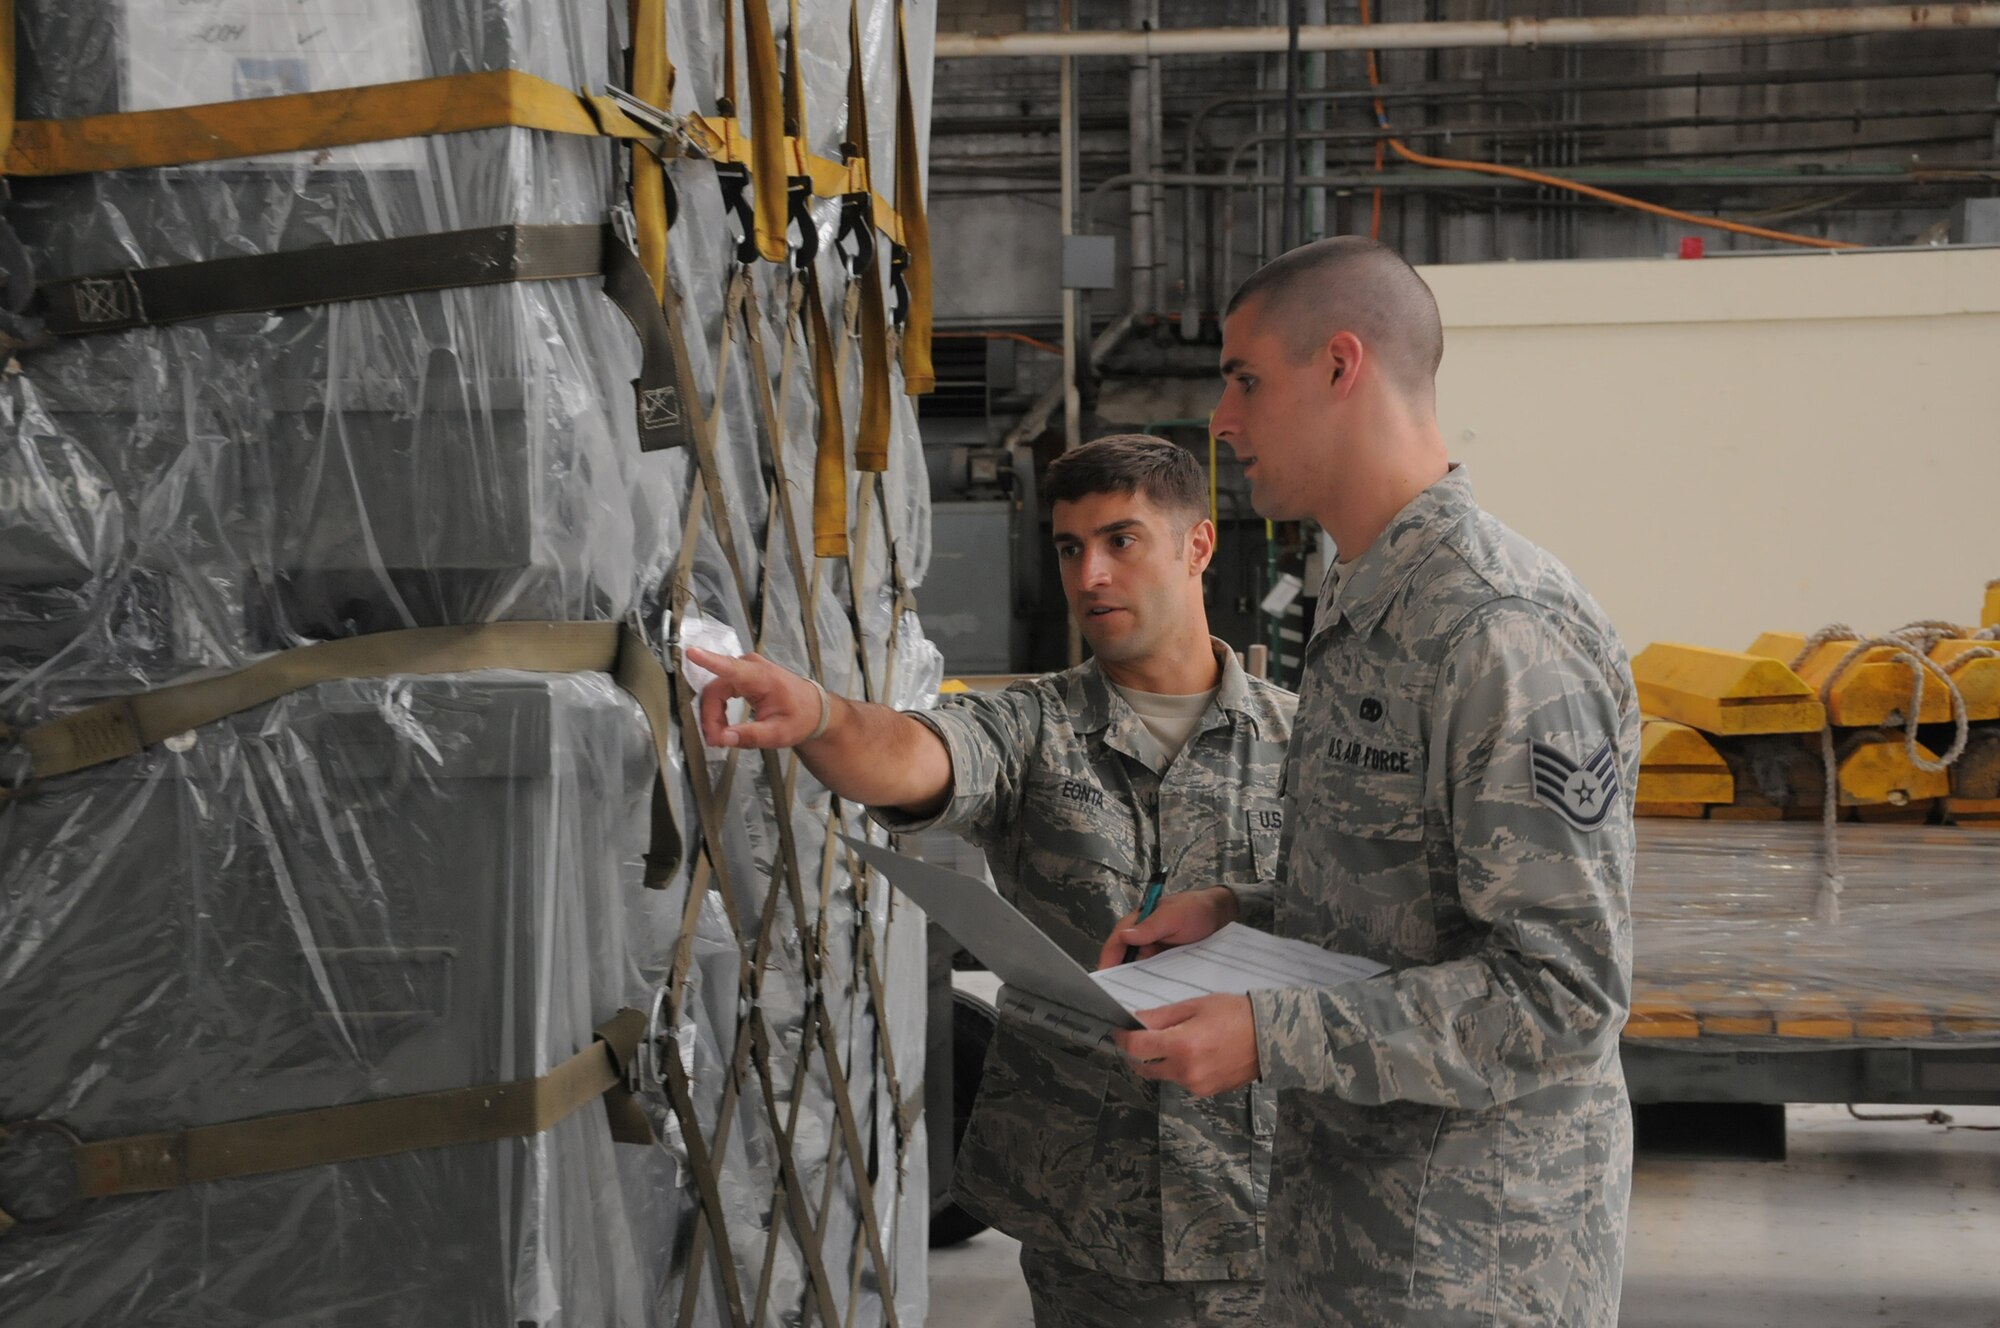 WRIGHT-PATTERSON AIR FORCE BASE, Ohio – Tech. Sgt. Michael Eonta and Staff Sgt. Eric Wadlington, both assigned to the 87th Aerial Port Squadron, verify the accuracy of shipping information on a cargo pallet during pallet build training on July 19, 2014. The reservists received the training to upgrade their proficiency in their career field. (U.S. Air Force photo/Tech. Sgt. Anthony G. Springer)